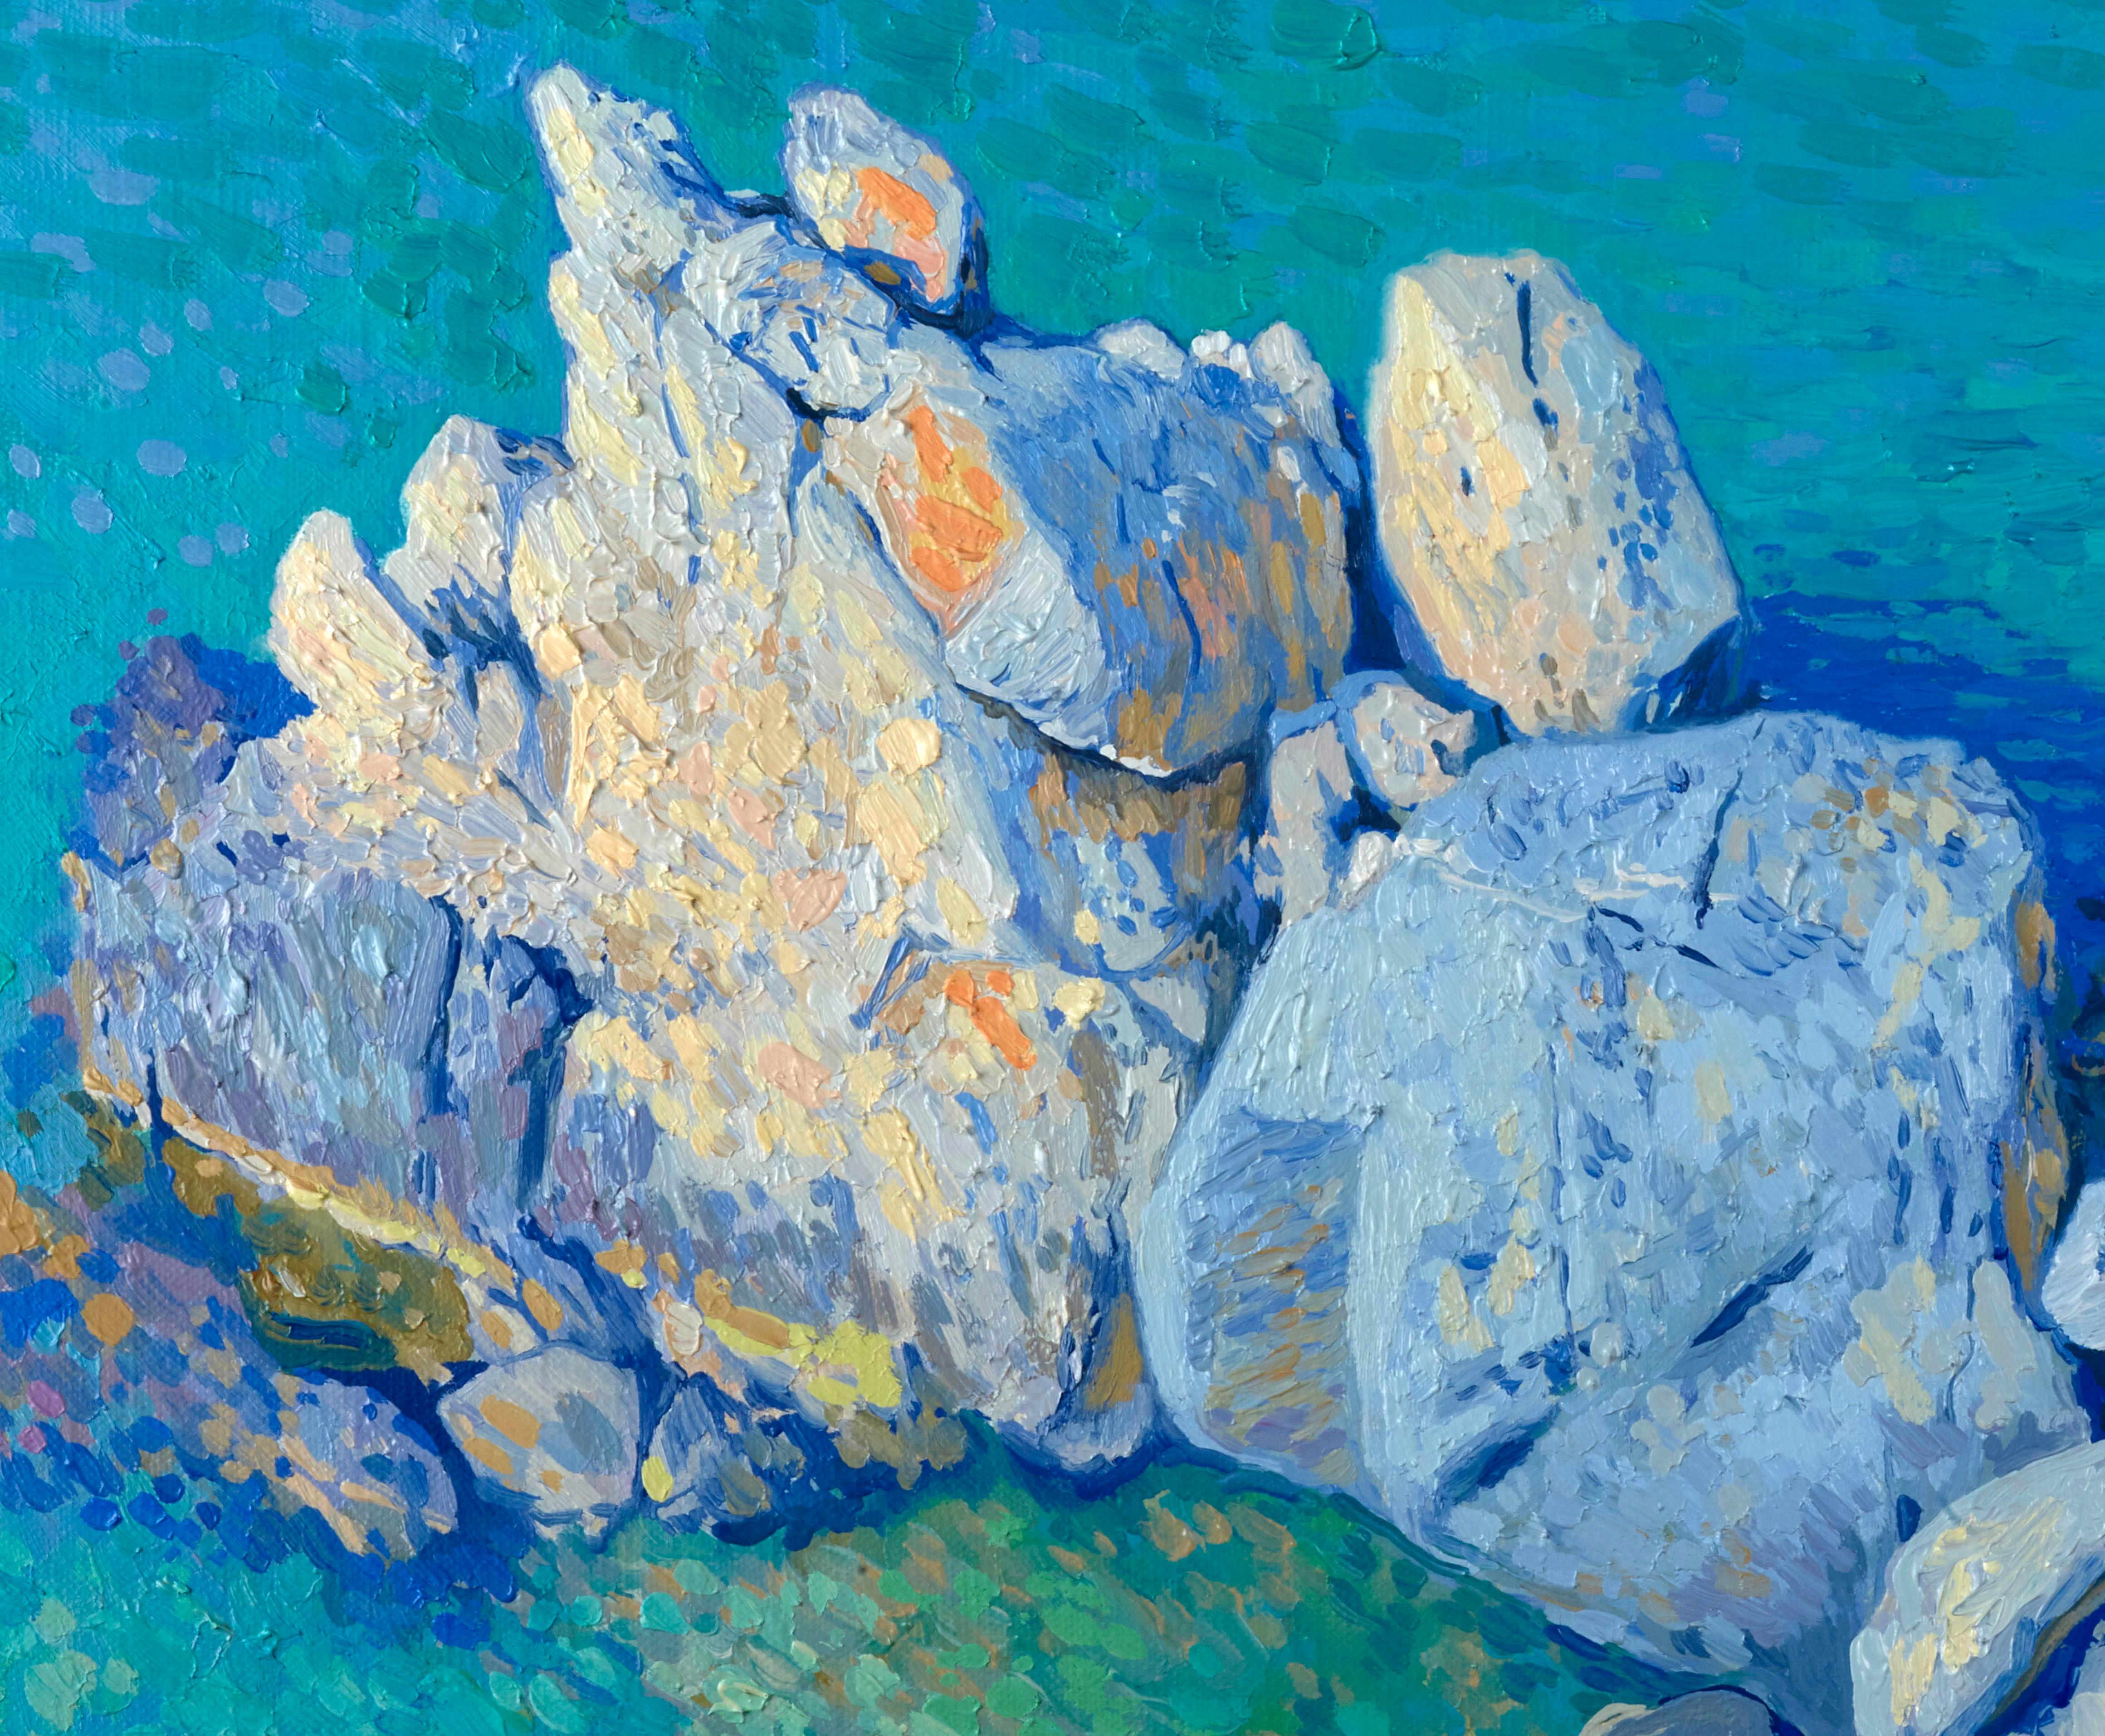 Rocks by the sea - Painting by Simon Kozhin